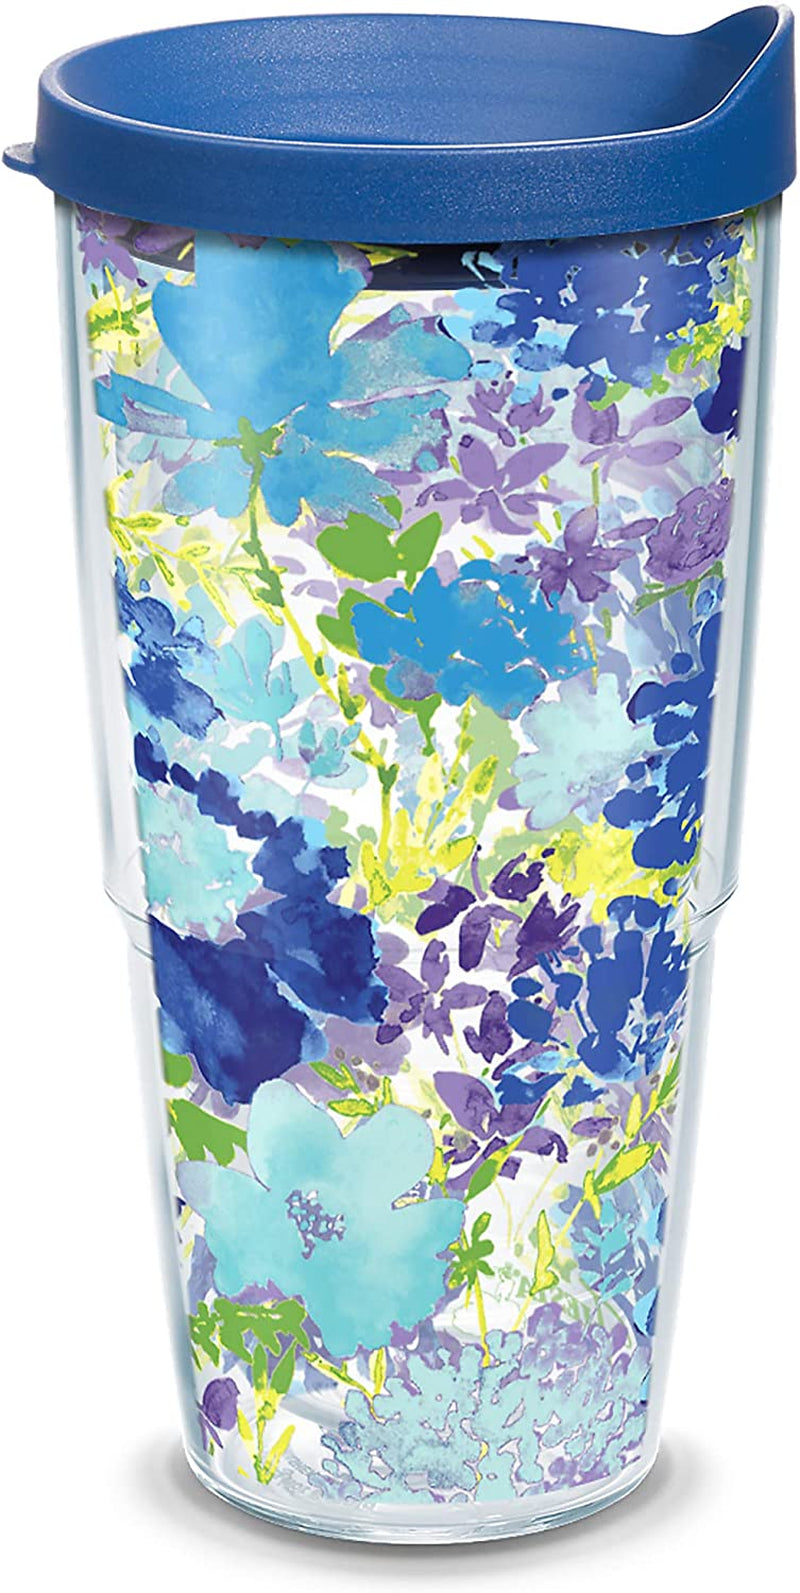 Tervis Made in USA Double Walled Fiesta Insulated Tumbler Cup Keeps Drinks Cold & Hot, 16Oz Mug - Purple Lid, Purple Floral Home & Garden > Kitchen & Dining > Tableware > Drinkware Tervis Classic - Blue Lid 24oz 